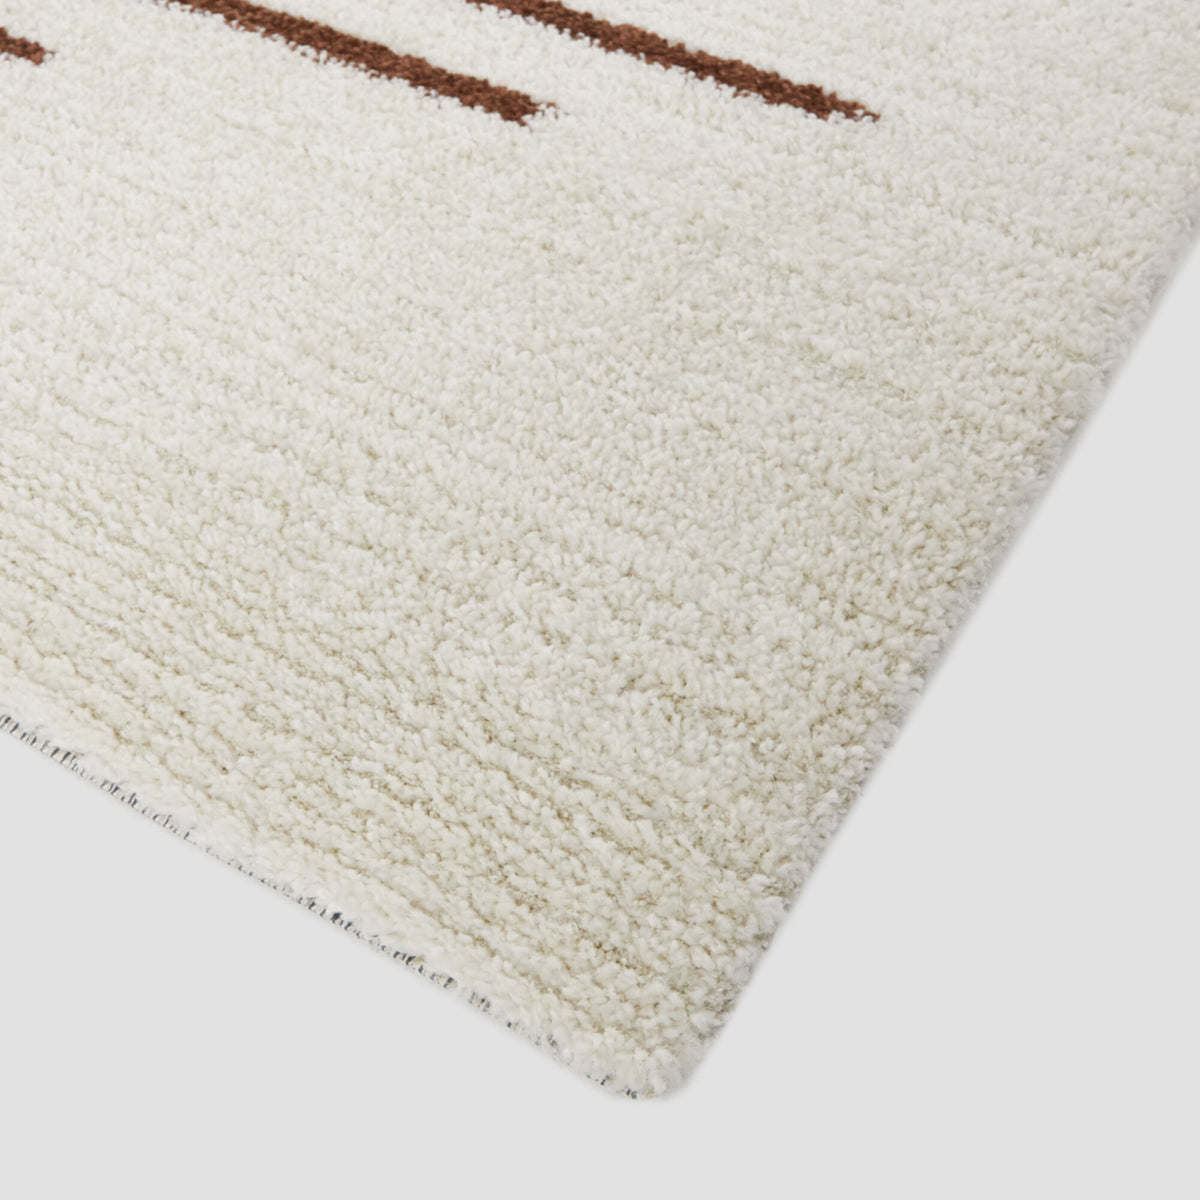 Andriesse Modern Striped Area Rug